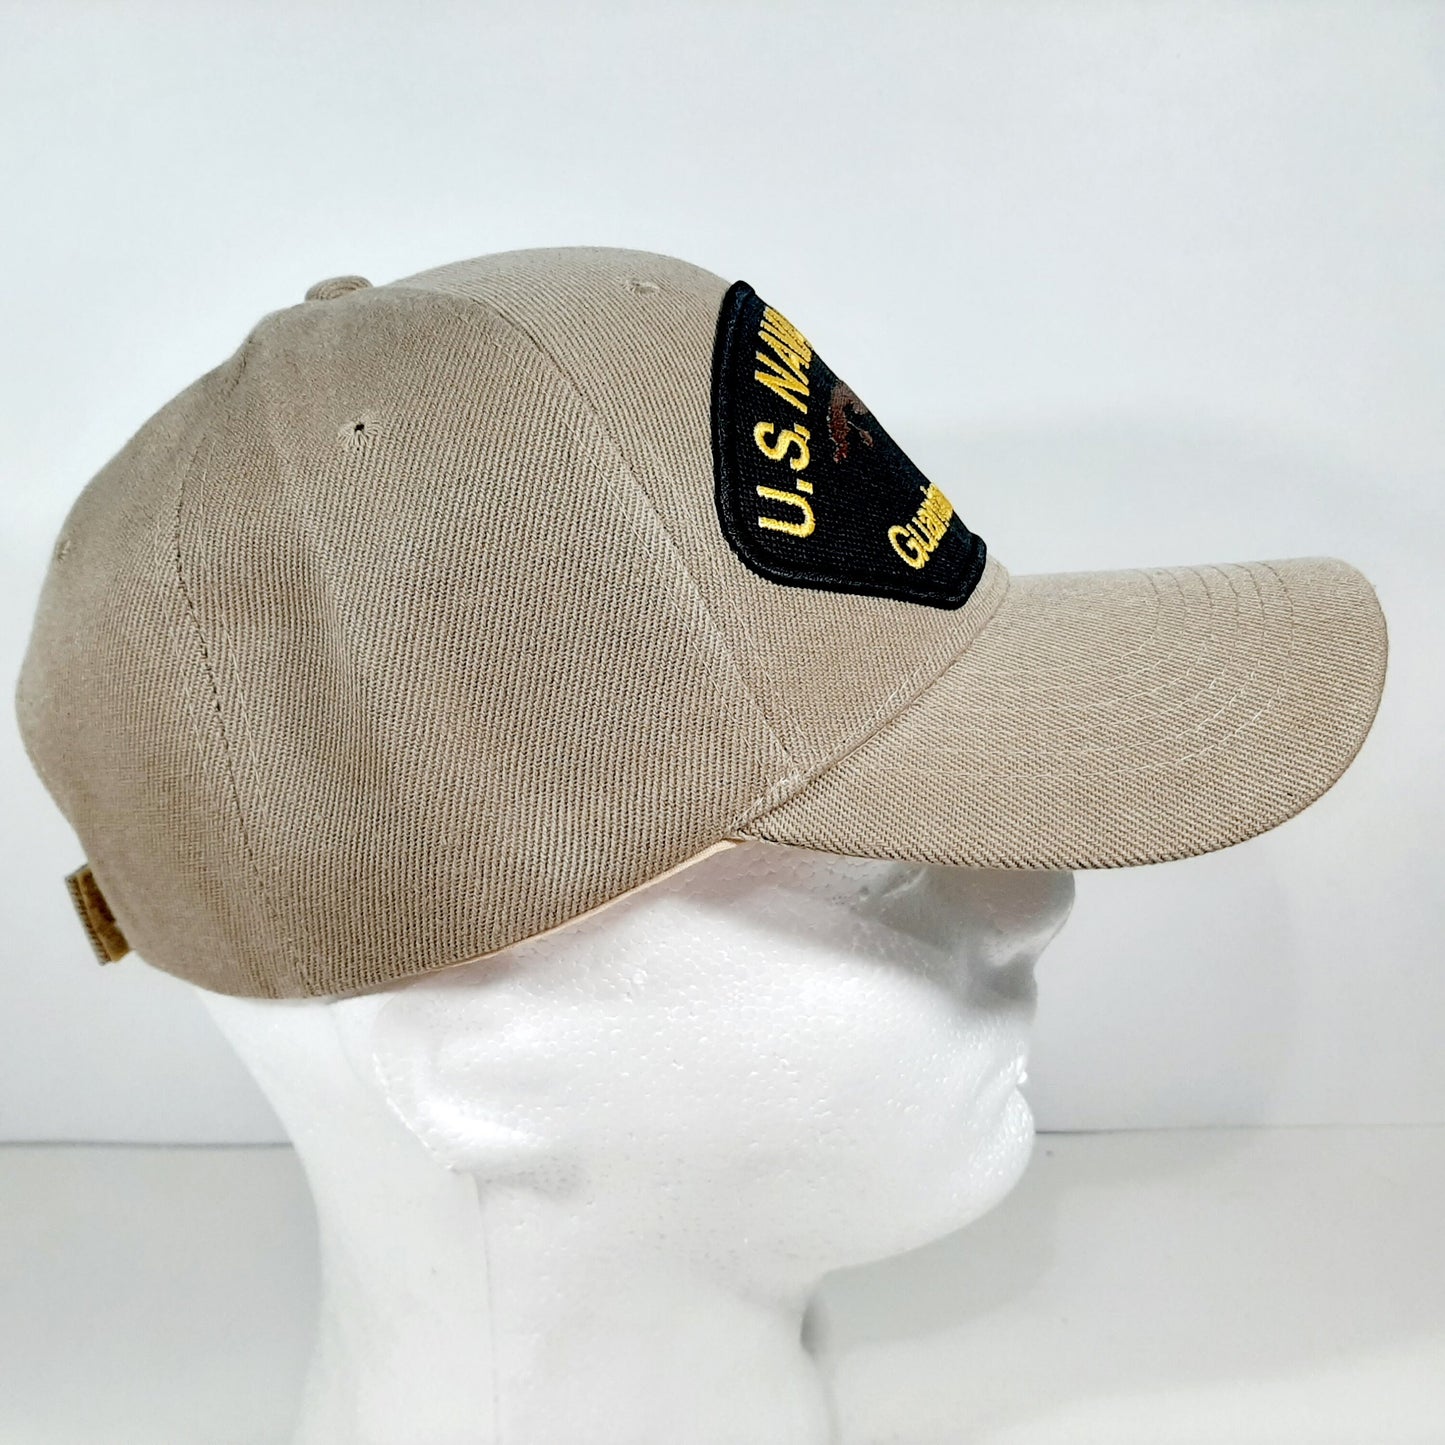 Naval Station Guantanamo Bay Cuba Embroidered Patch Hat Baseball Cap Beige